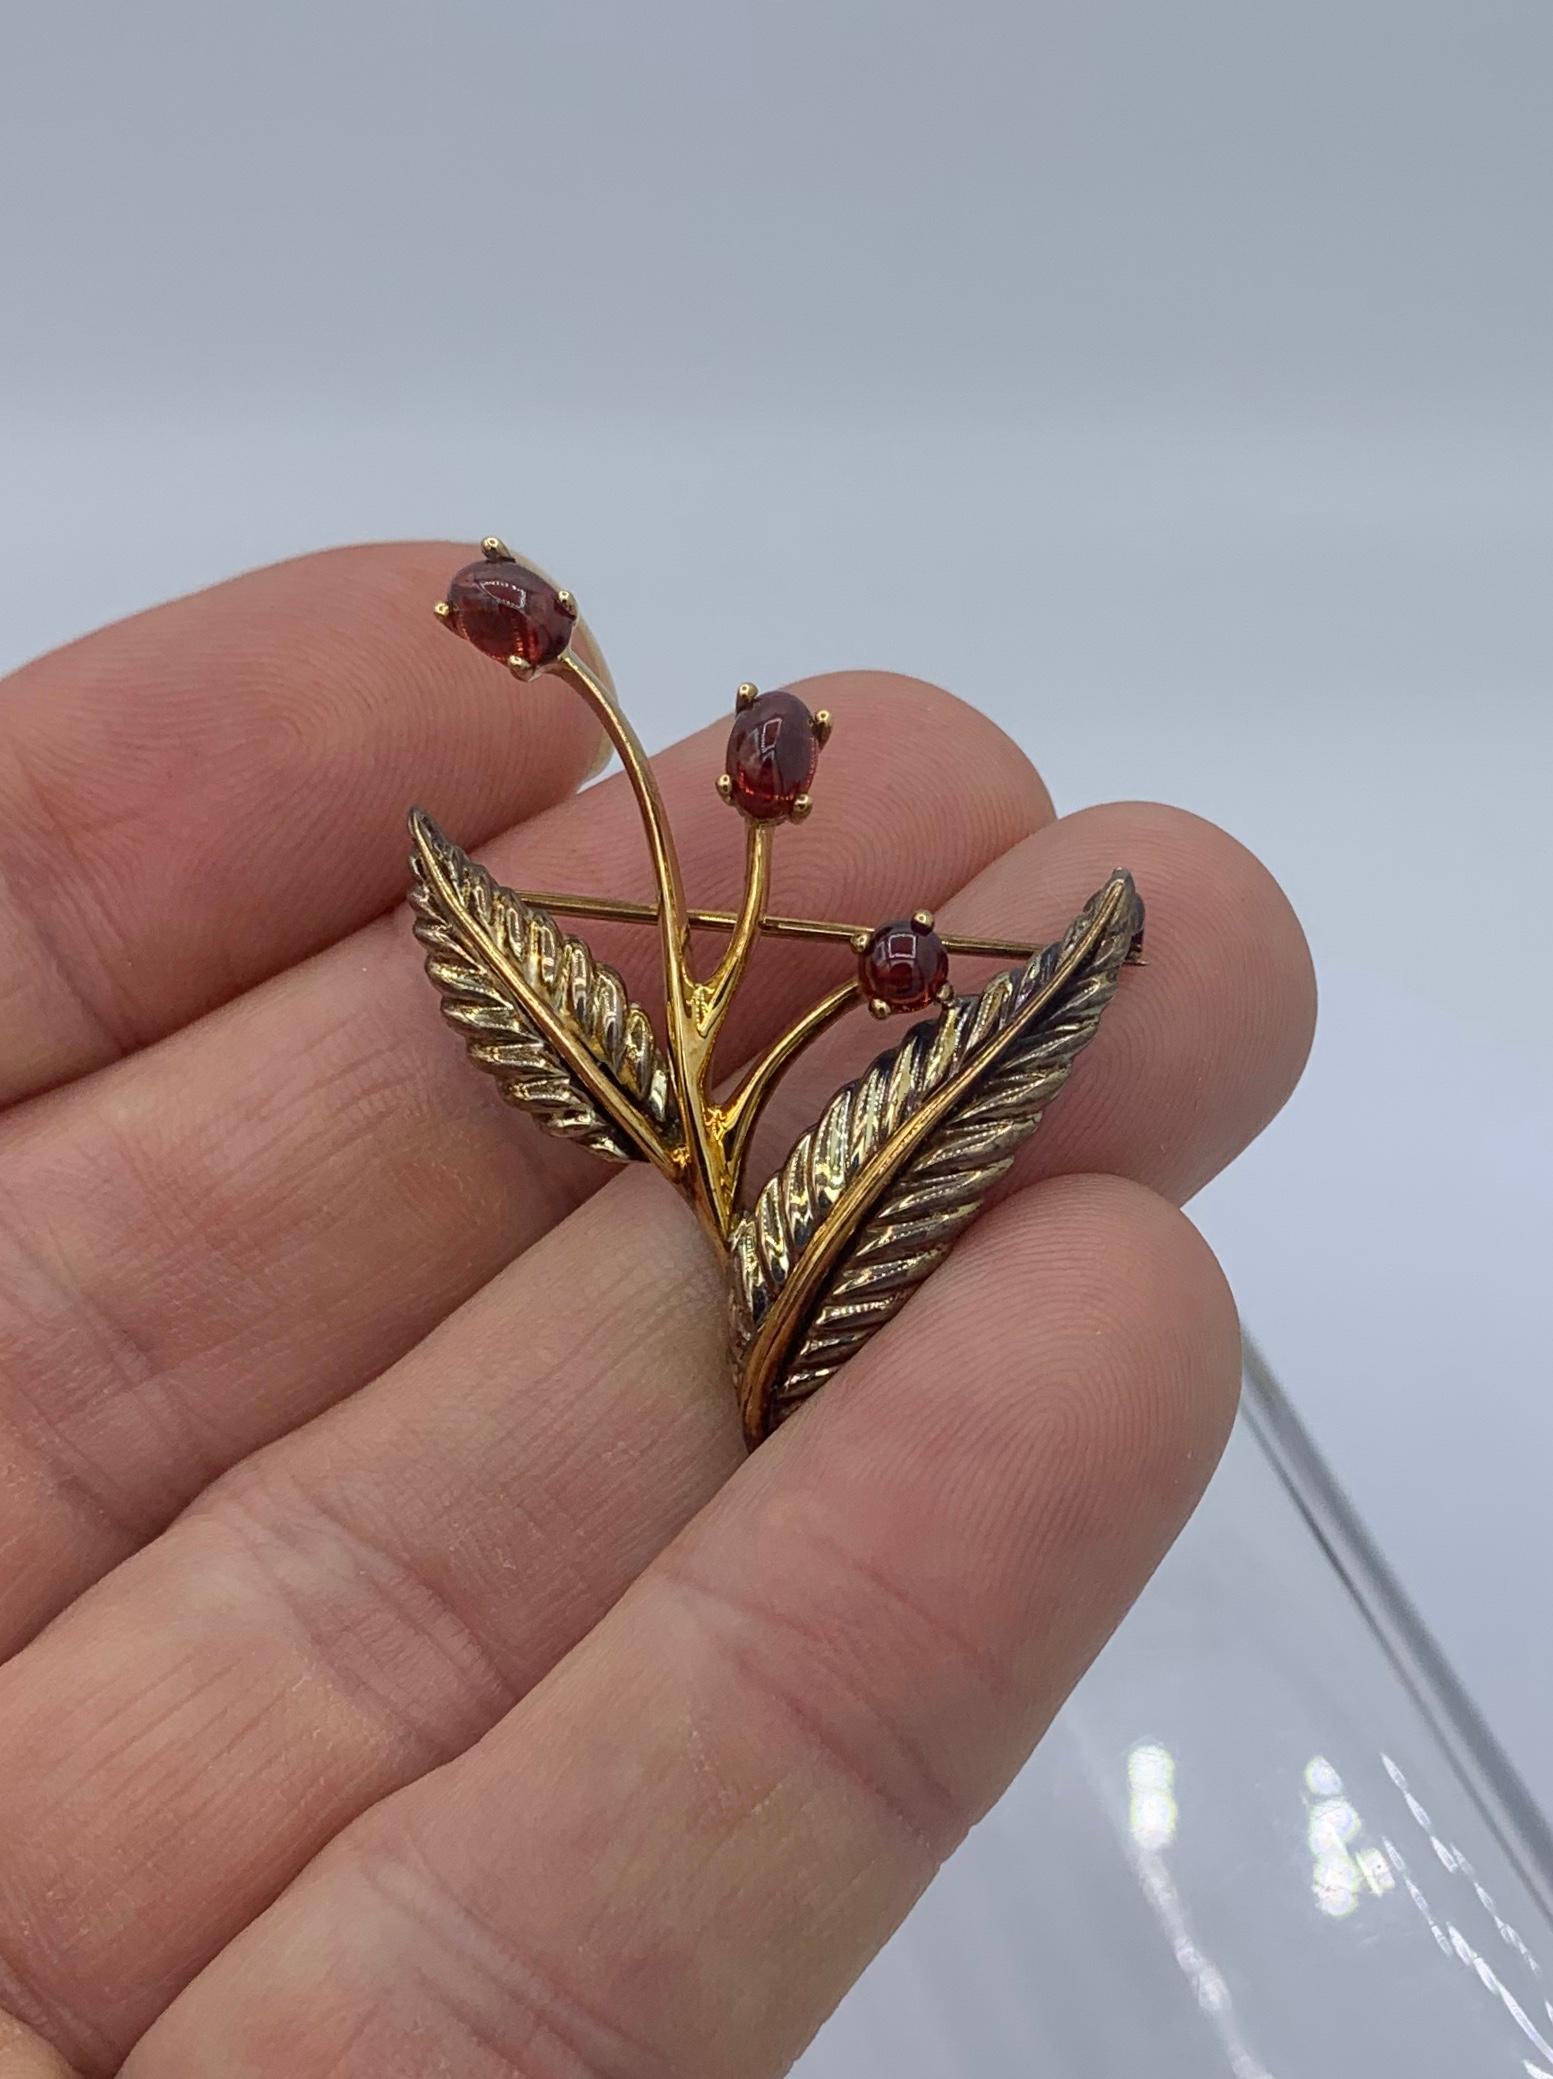 Tiffany & Co Garnet Flower Brooch Pin 18K Gold Sterling Vintage Original Box In Good Condition For Sale In New York, NY